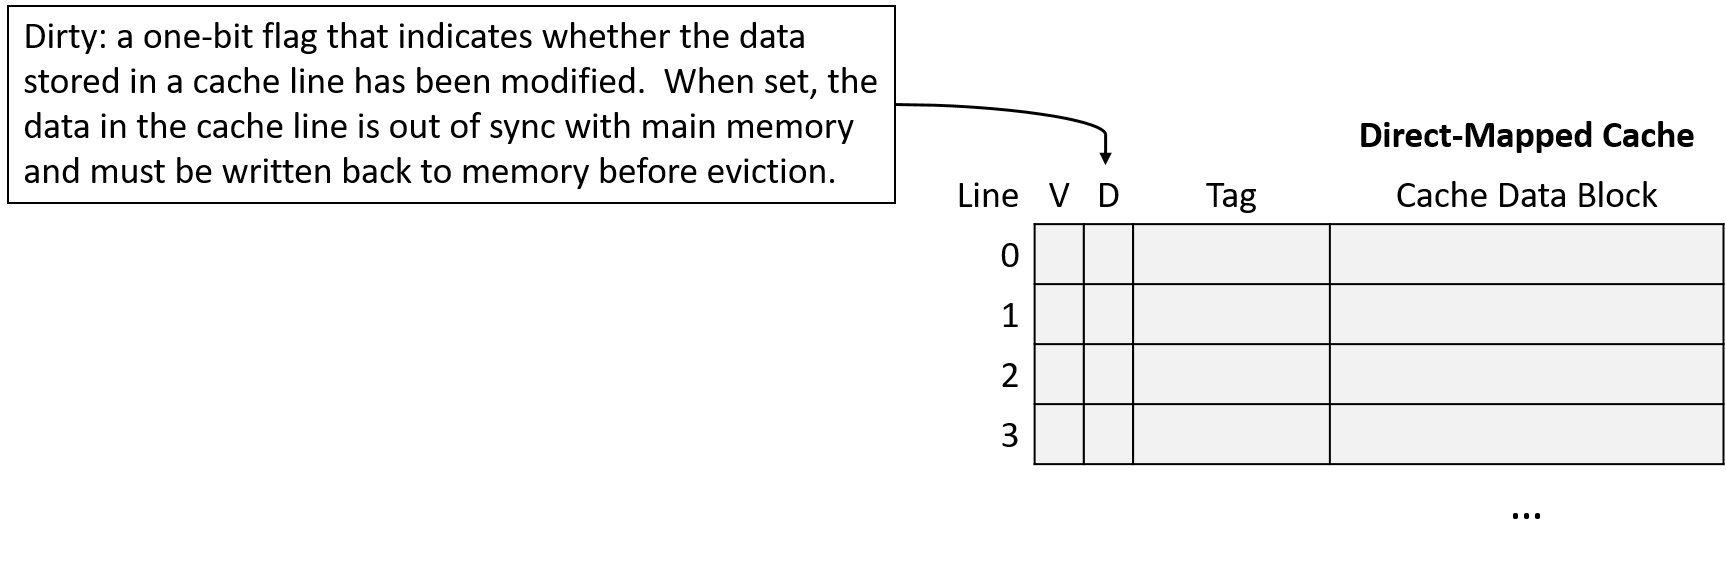 The dirty bit is a one-bit flag that indicates whether the data stored in a cache line has been written.  When set, the data in the cache is out of sync with main memory and must be written back to memory before eviction.